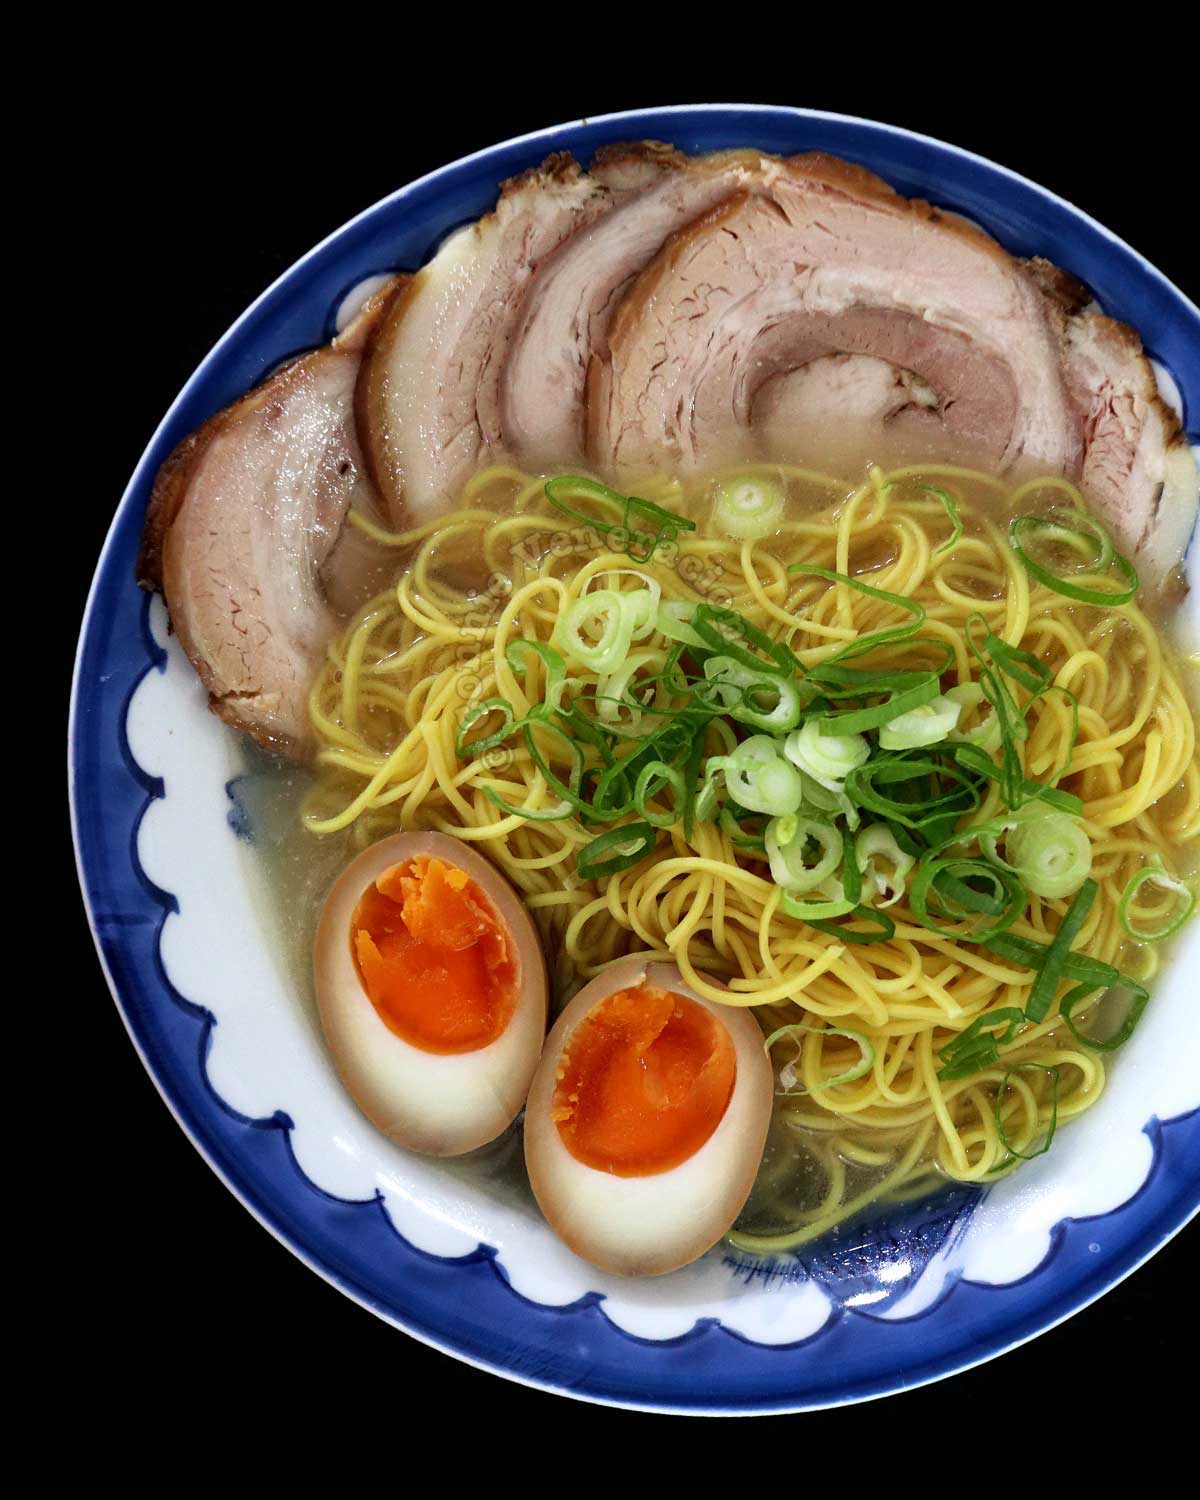 Ramen with chashu (braised rolled pork belly)